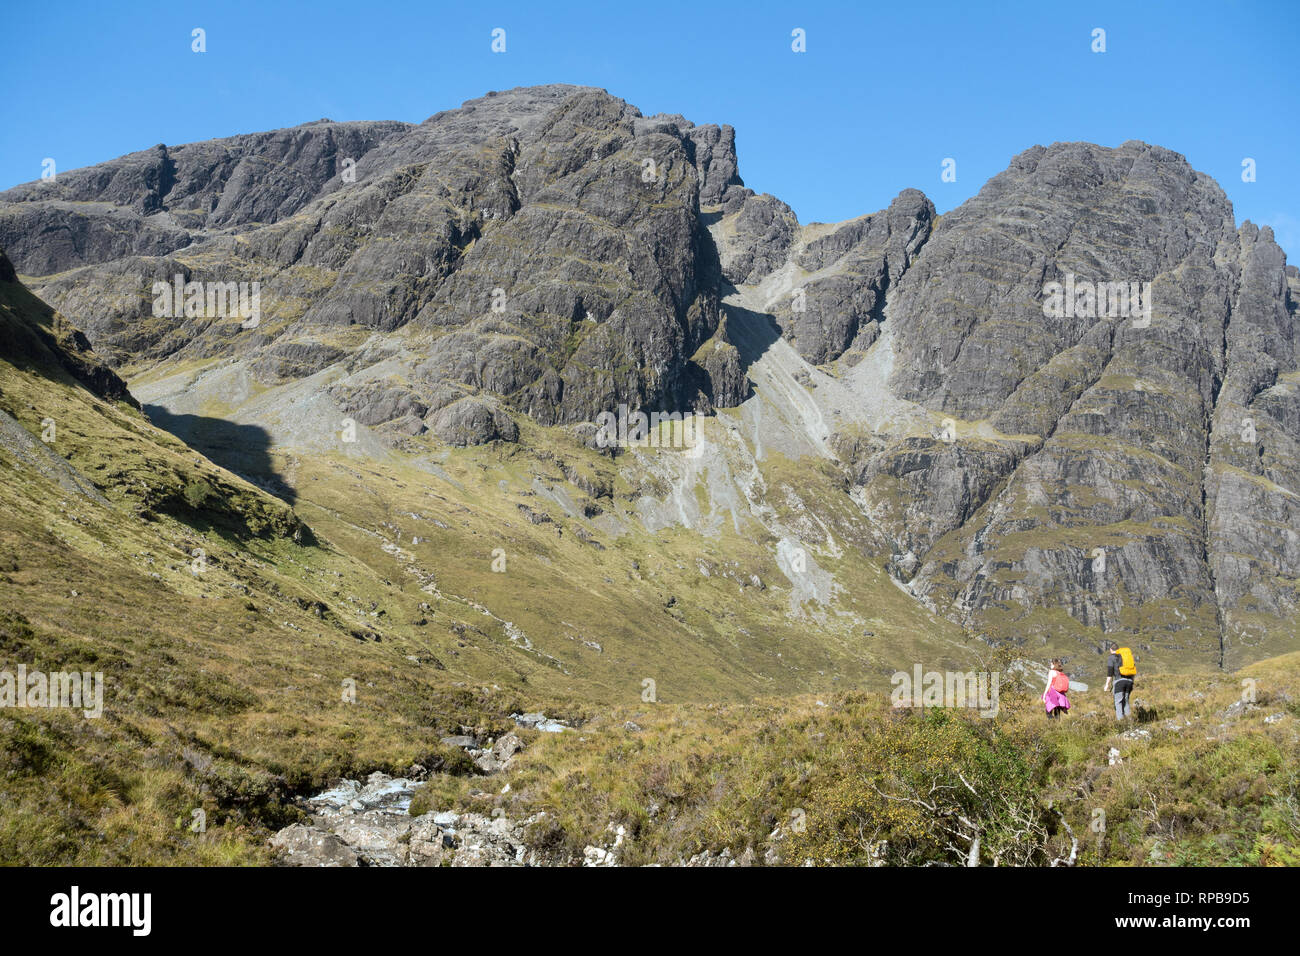 Two hill walkers below Bla Bheinn (centre) and Clach Glas (right) in the Black Cuillin Mountains on the Isle of Skye, Scotland, UK Stock Photo